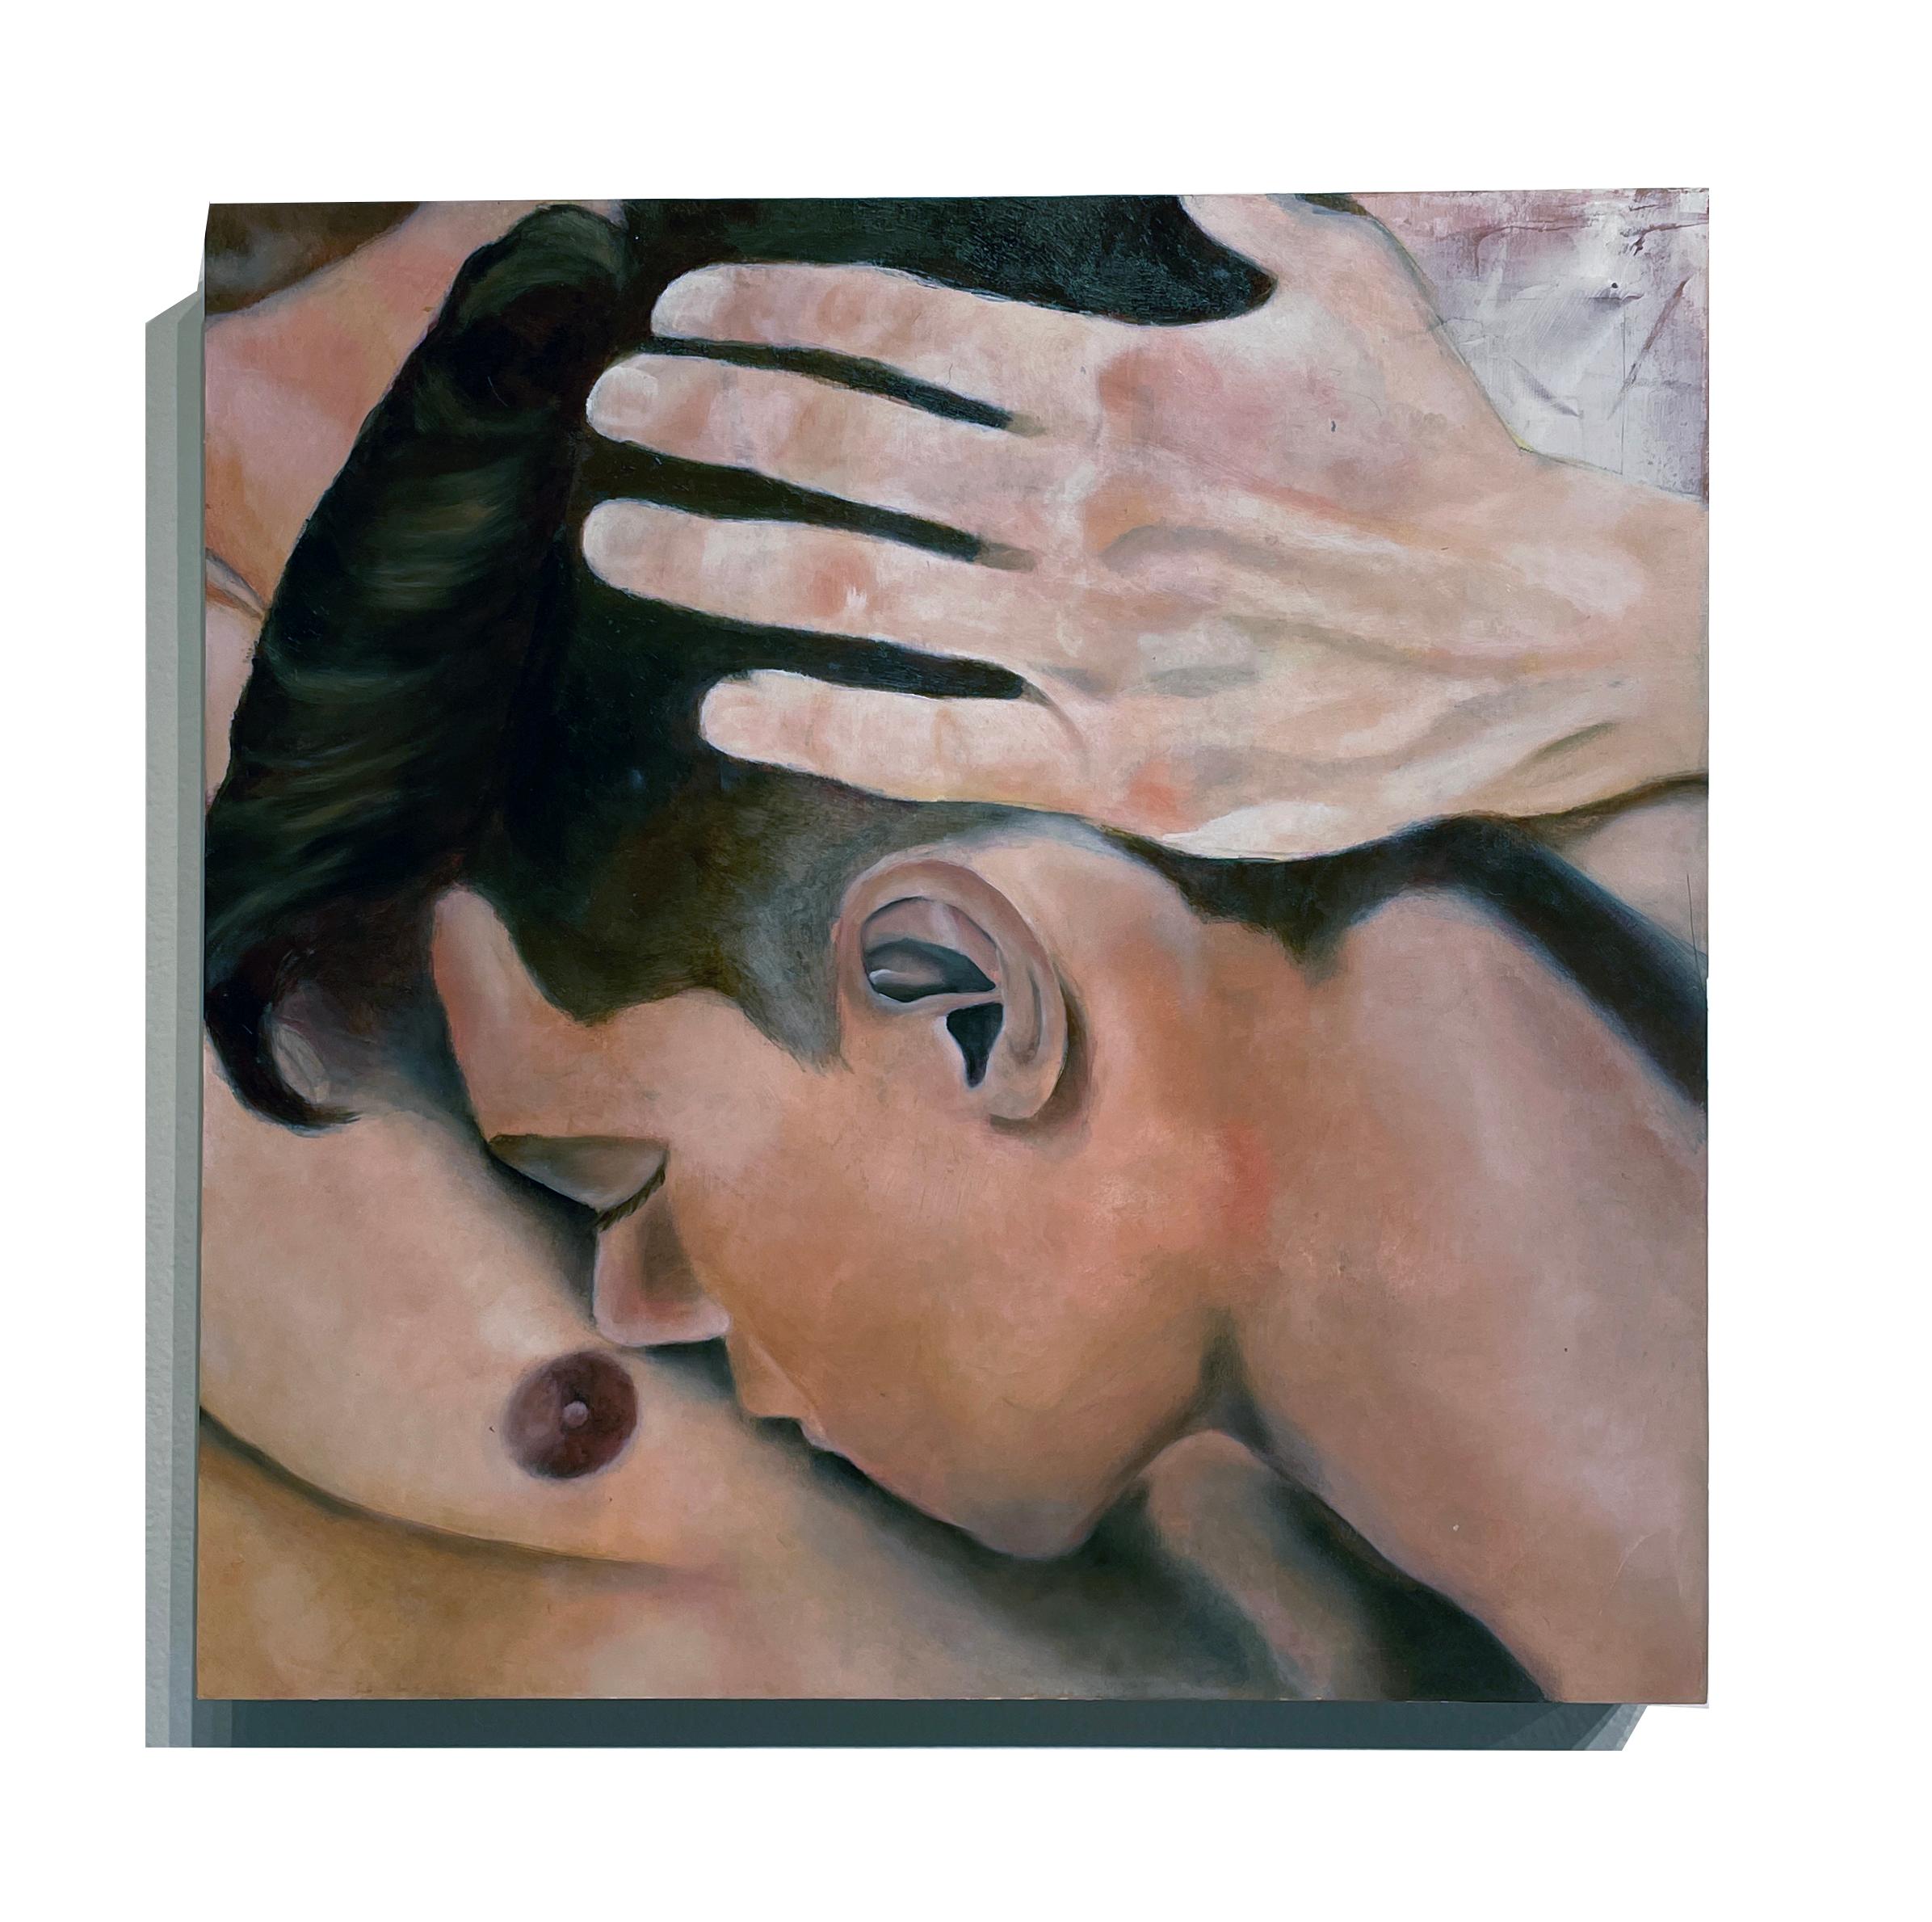 I Might Grow to Be Kinder - Intimate Portrayal of a Couple Embracing - Painting by Rick Sindt